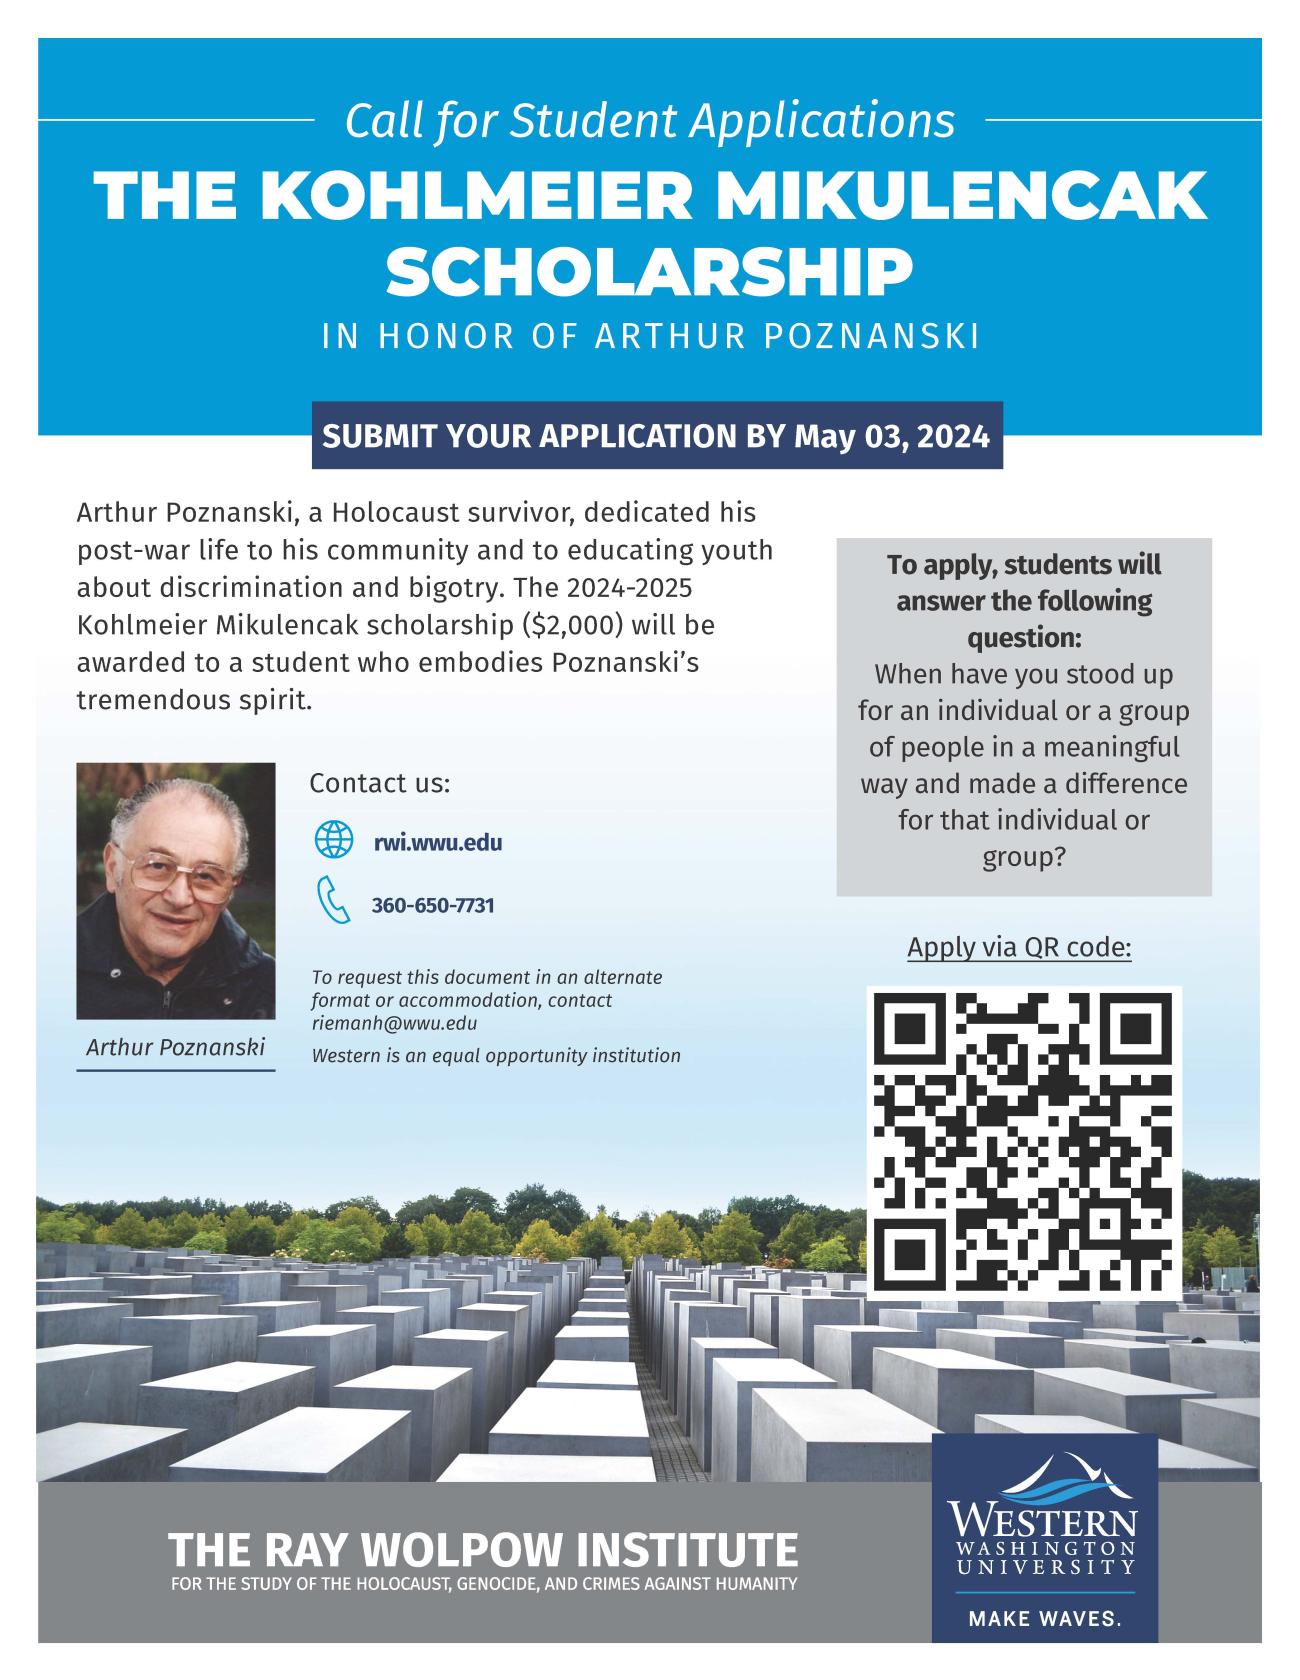 Scholarship poster including a QR code to access the Canvas site.